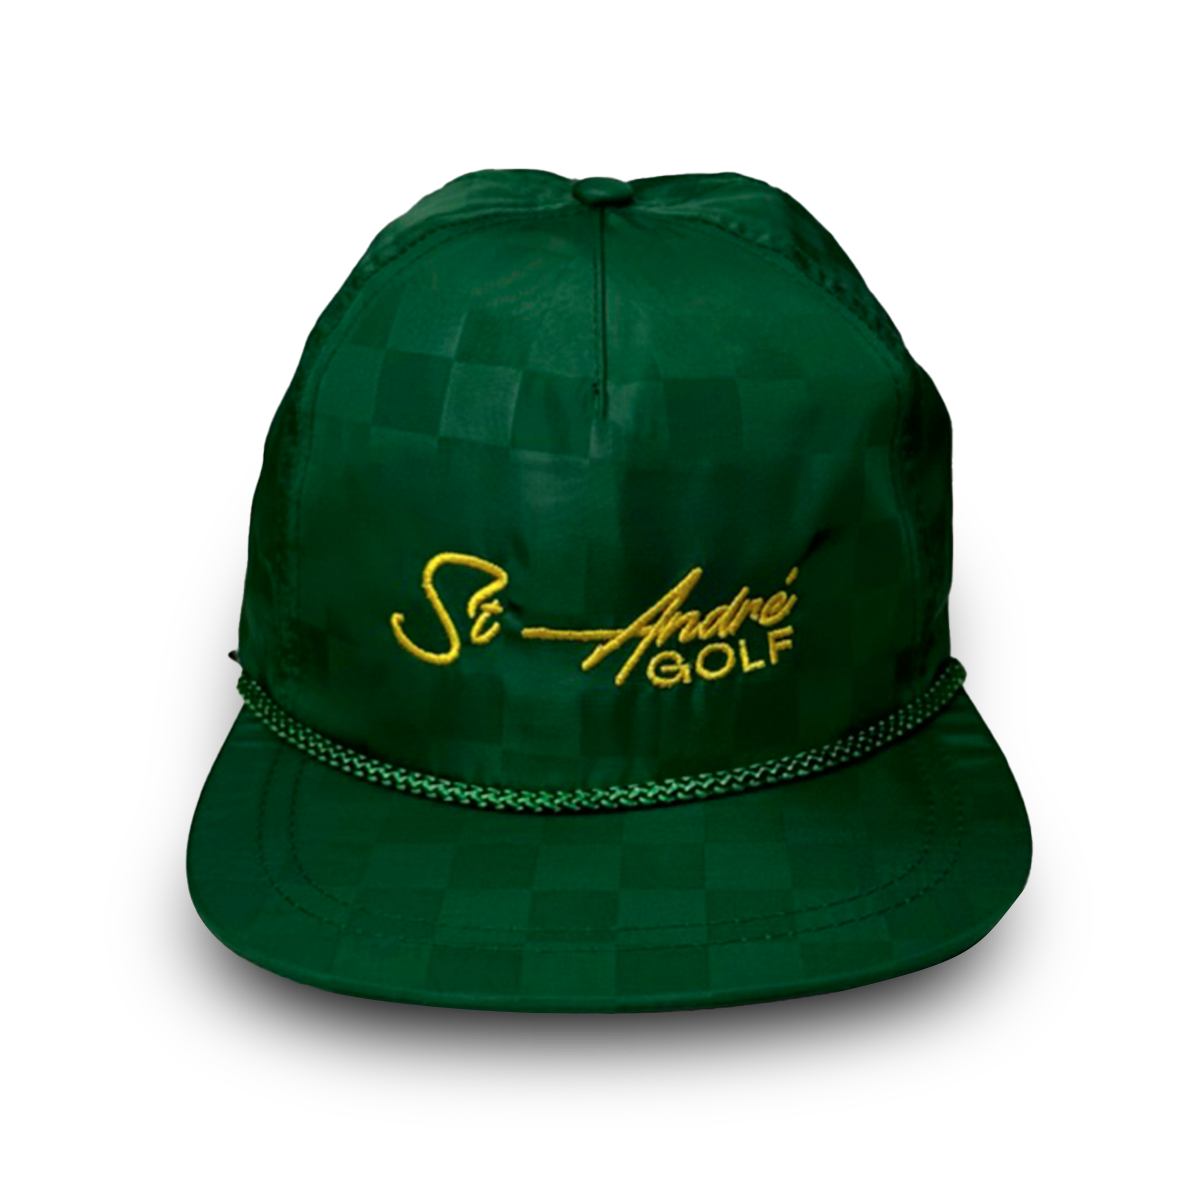 Signature St Andre Golf checkered green hat